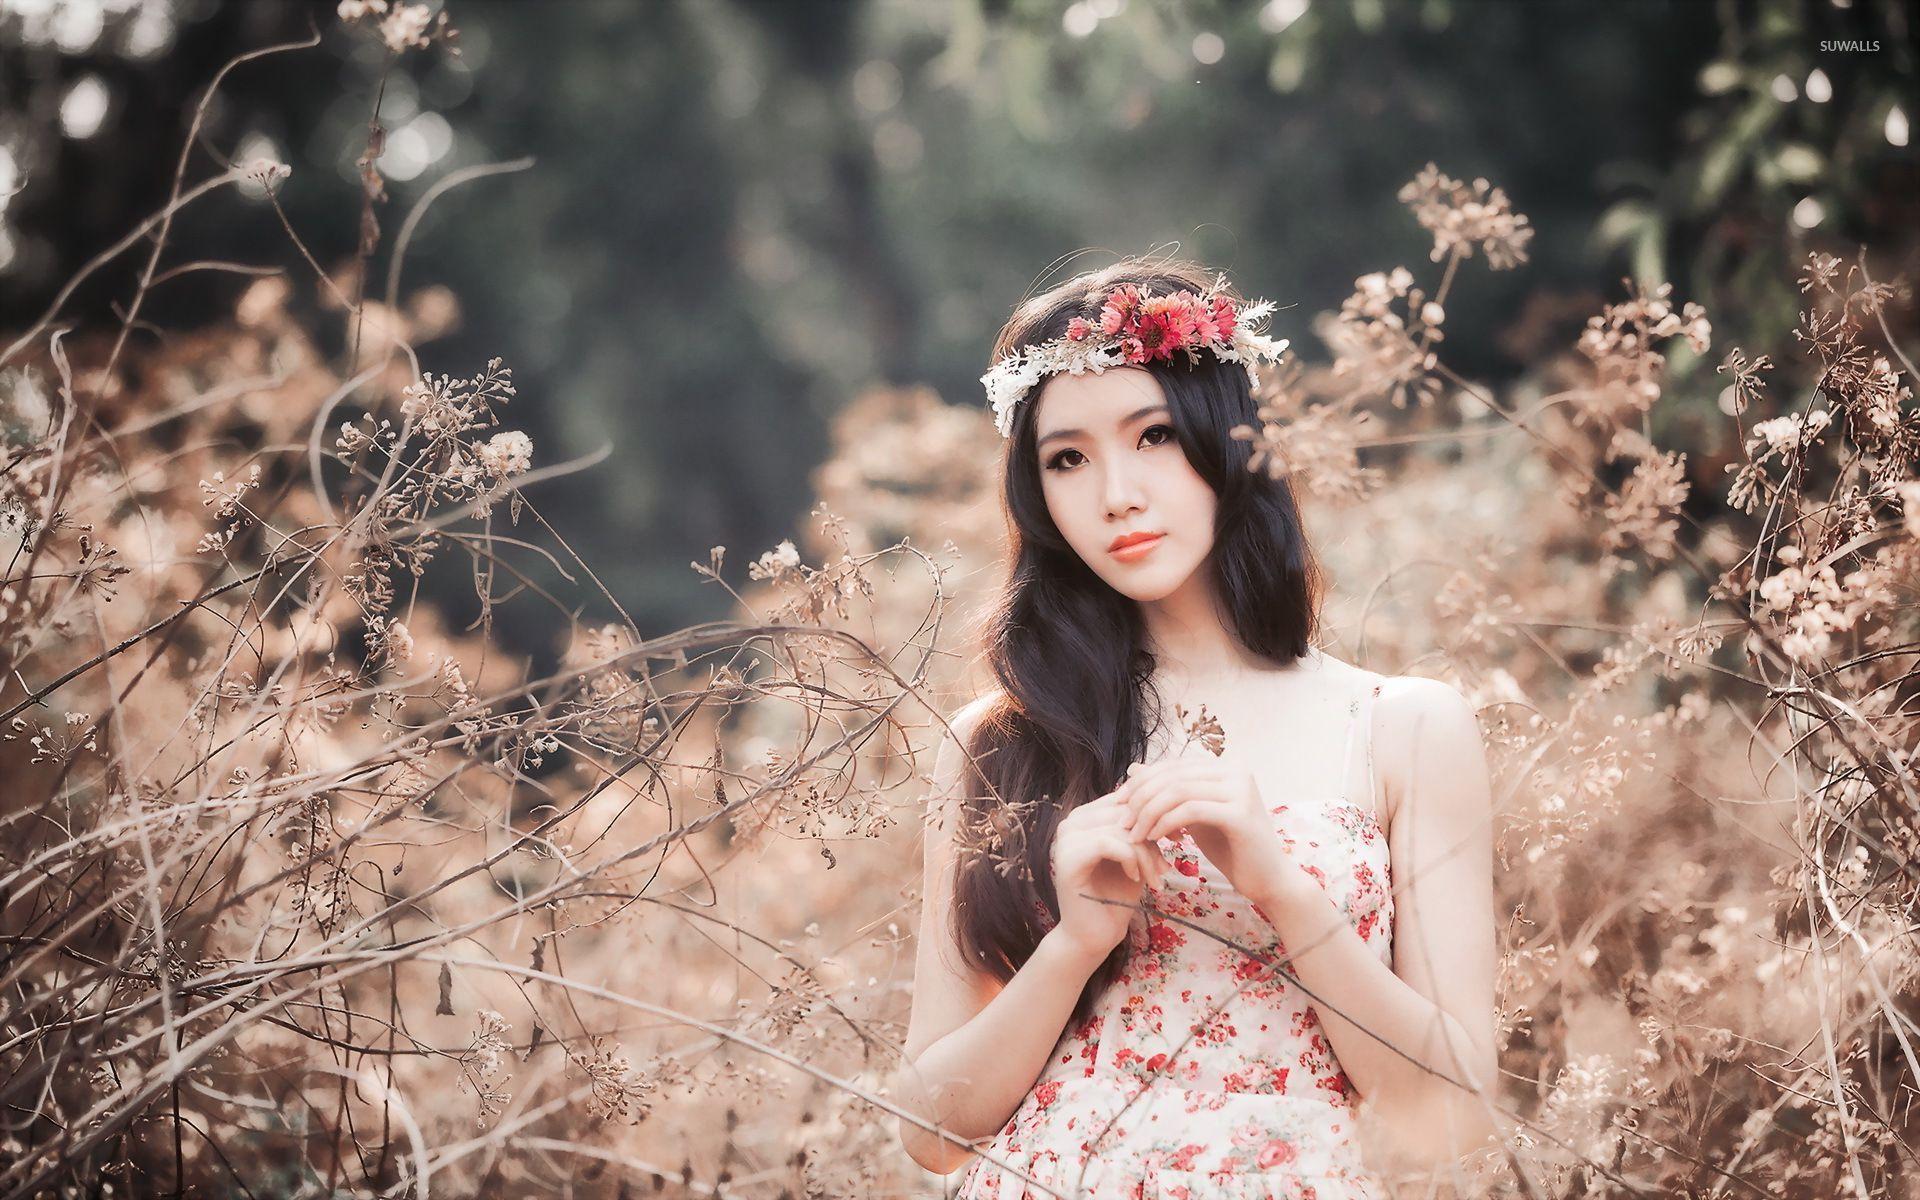 Model with a floral crown wallpaper wallpaper